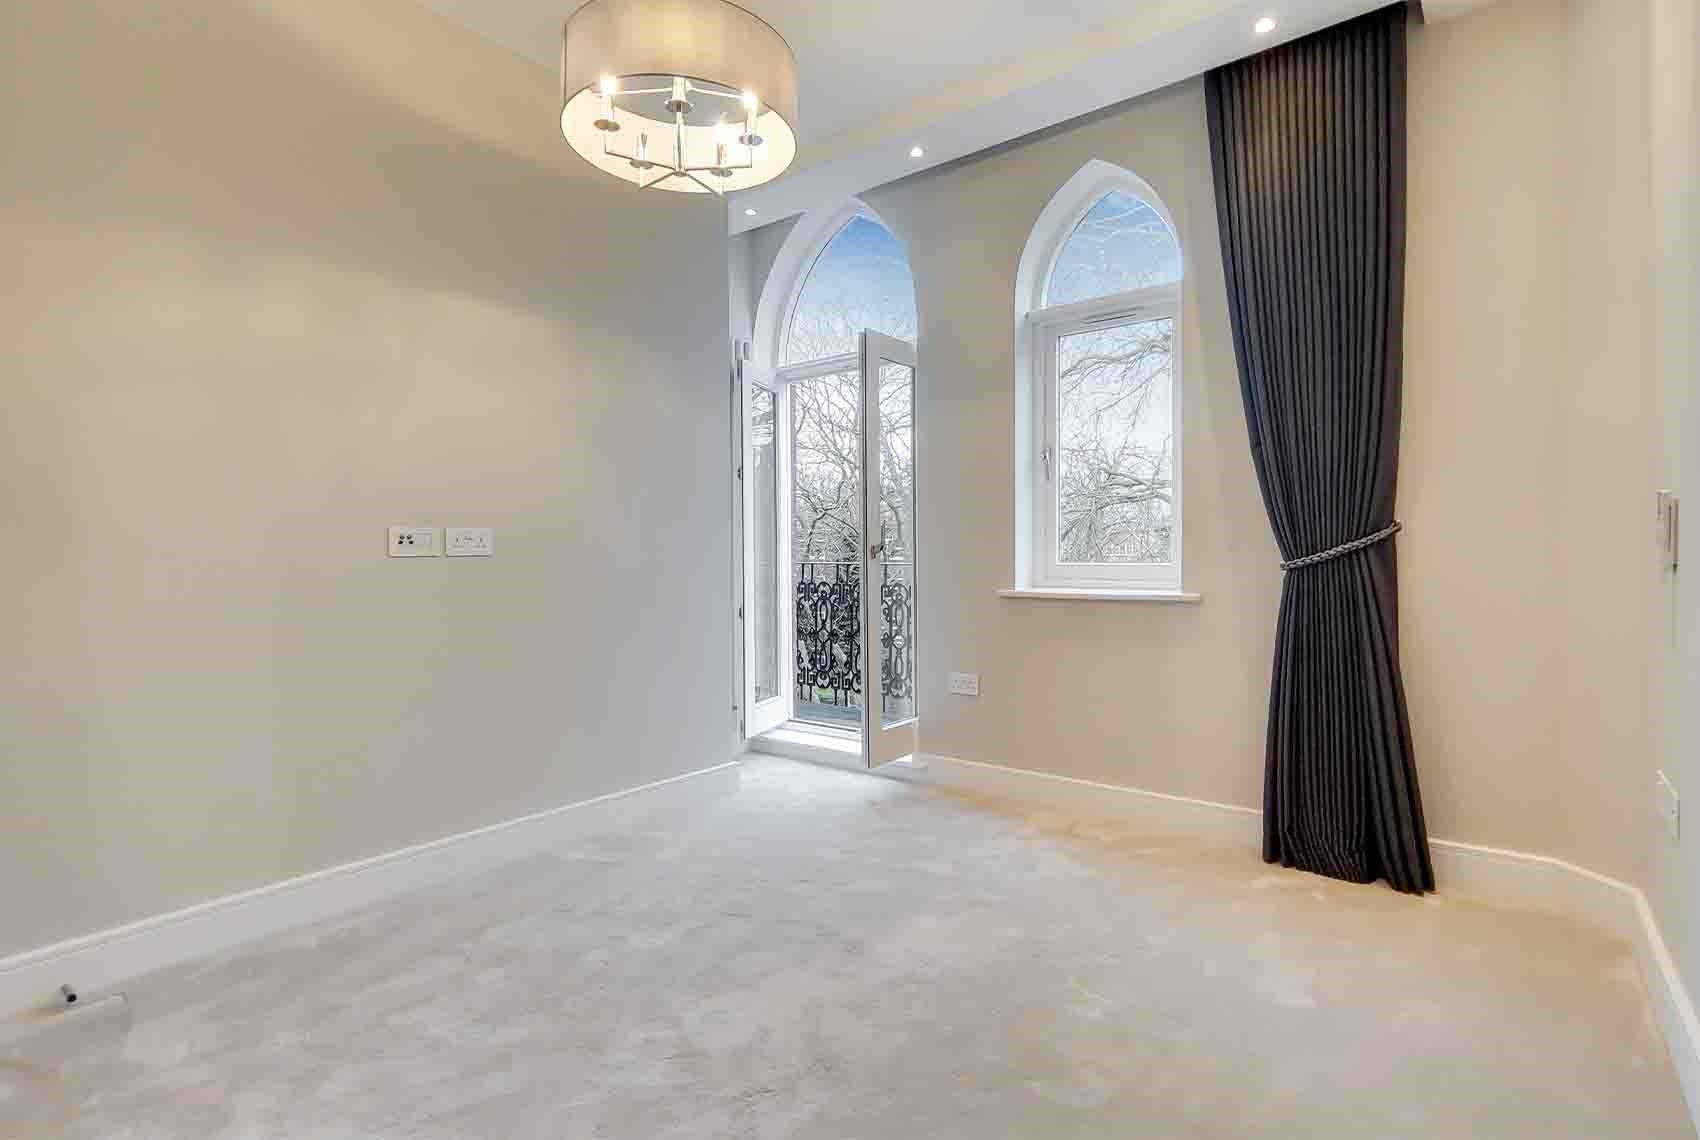 4 Bedroom Apartment to rent in Hampstead, London, NW3